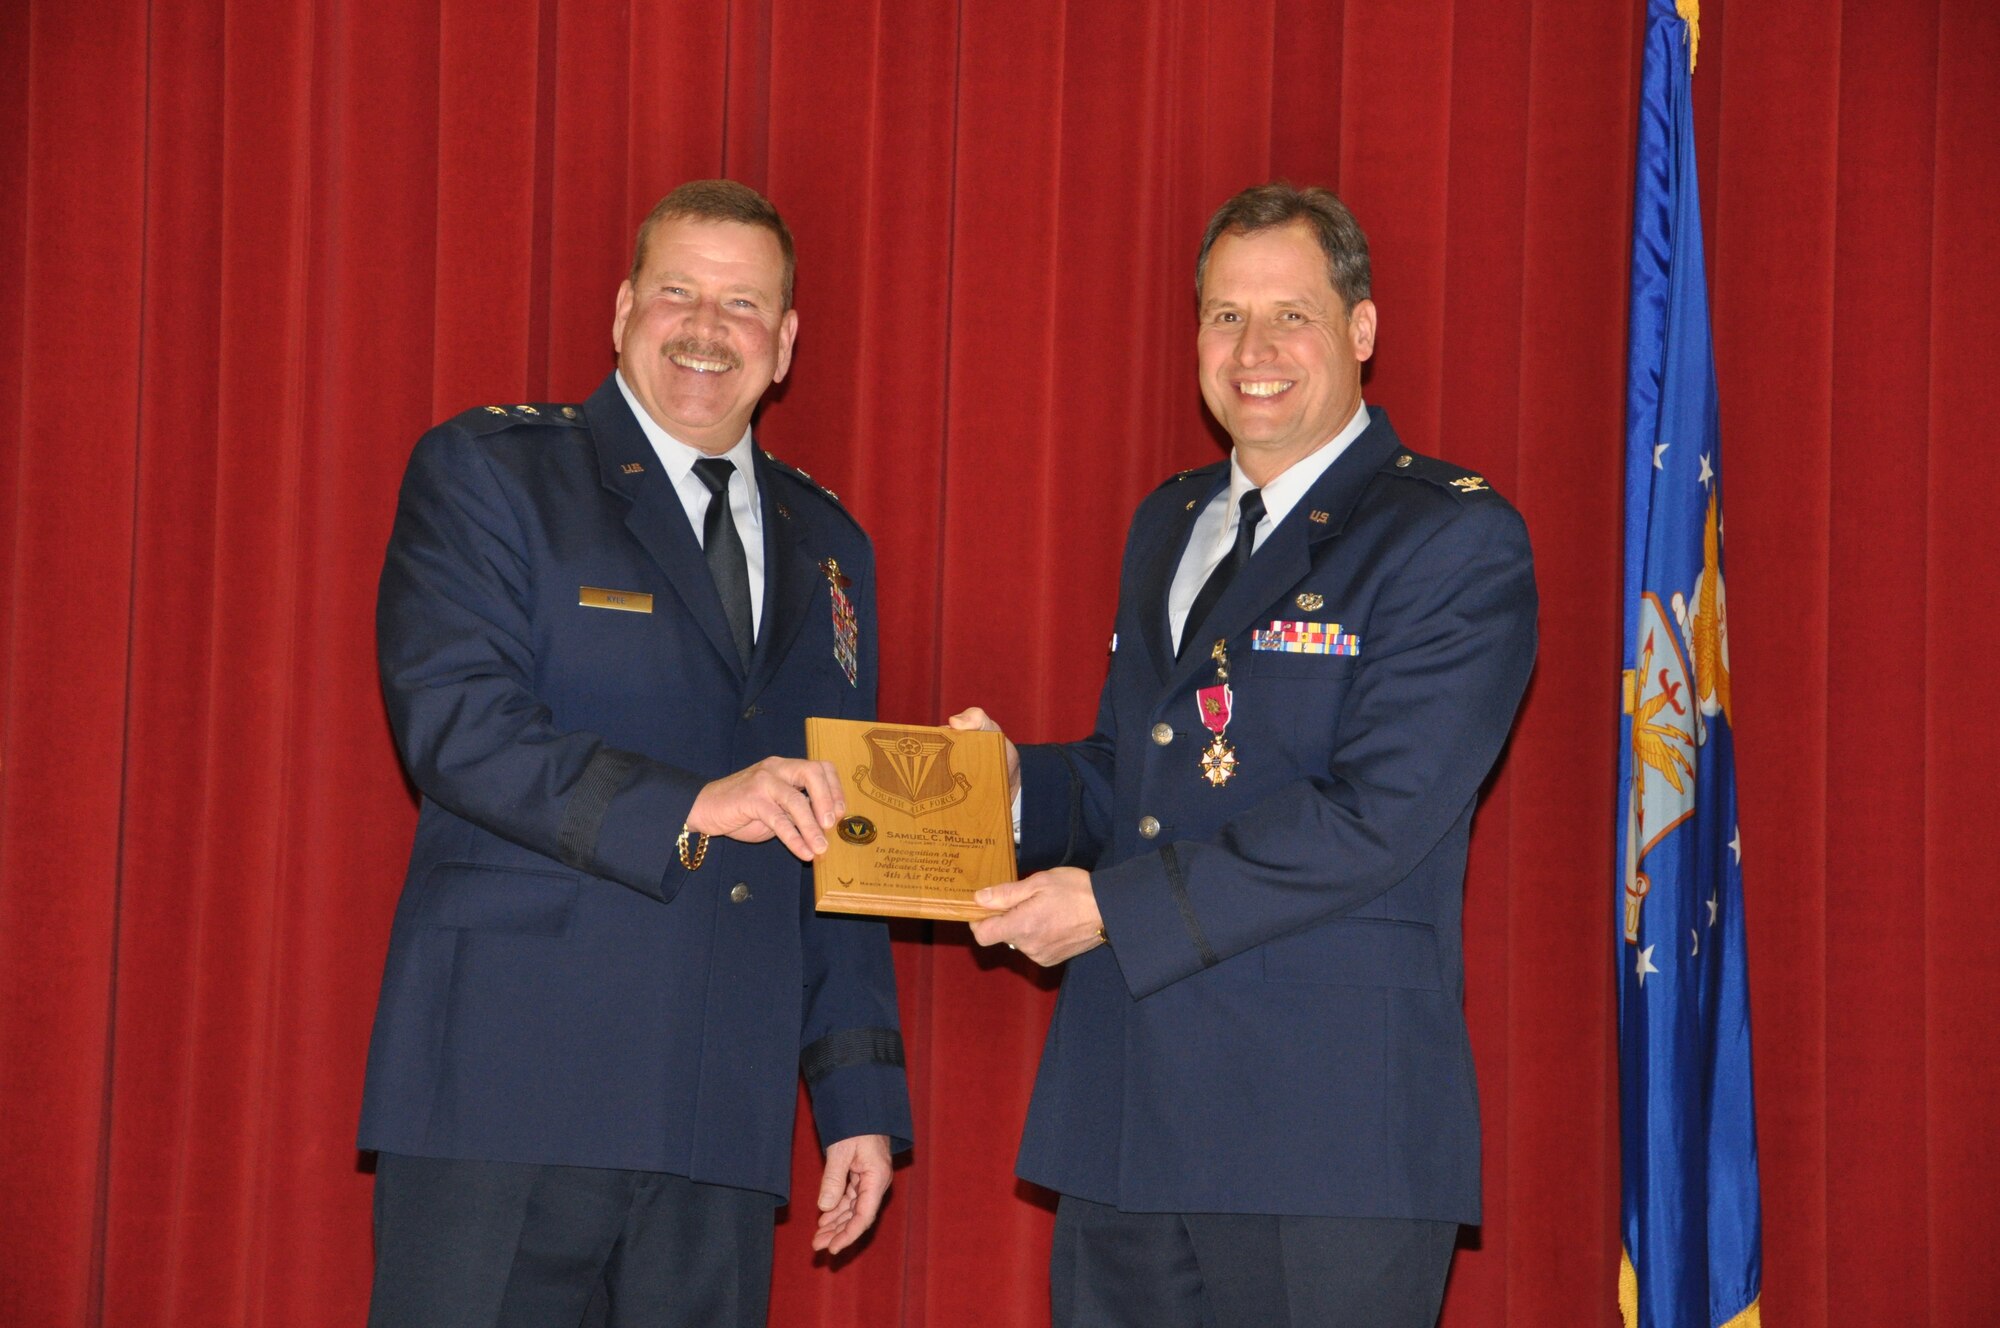 Colonel Samuel Mullin III, staff judge advocate, retired January 5 at March Air Reserve Base after 30 years of service in the Air Force.

